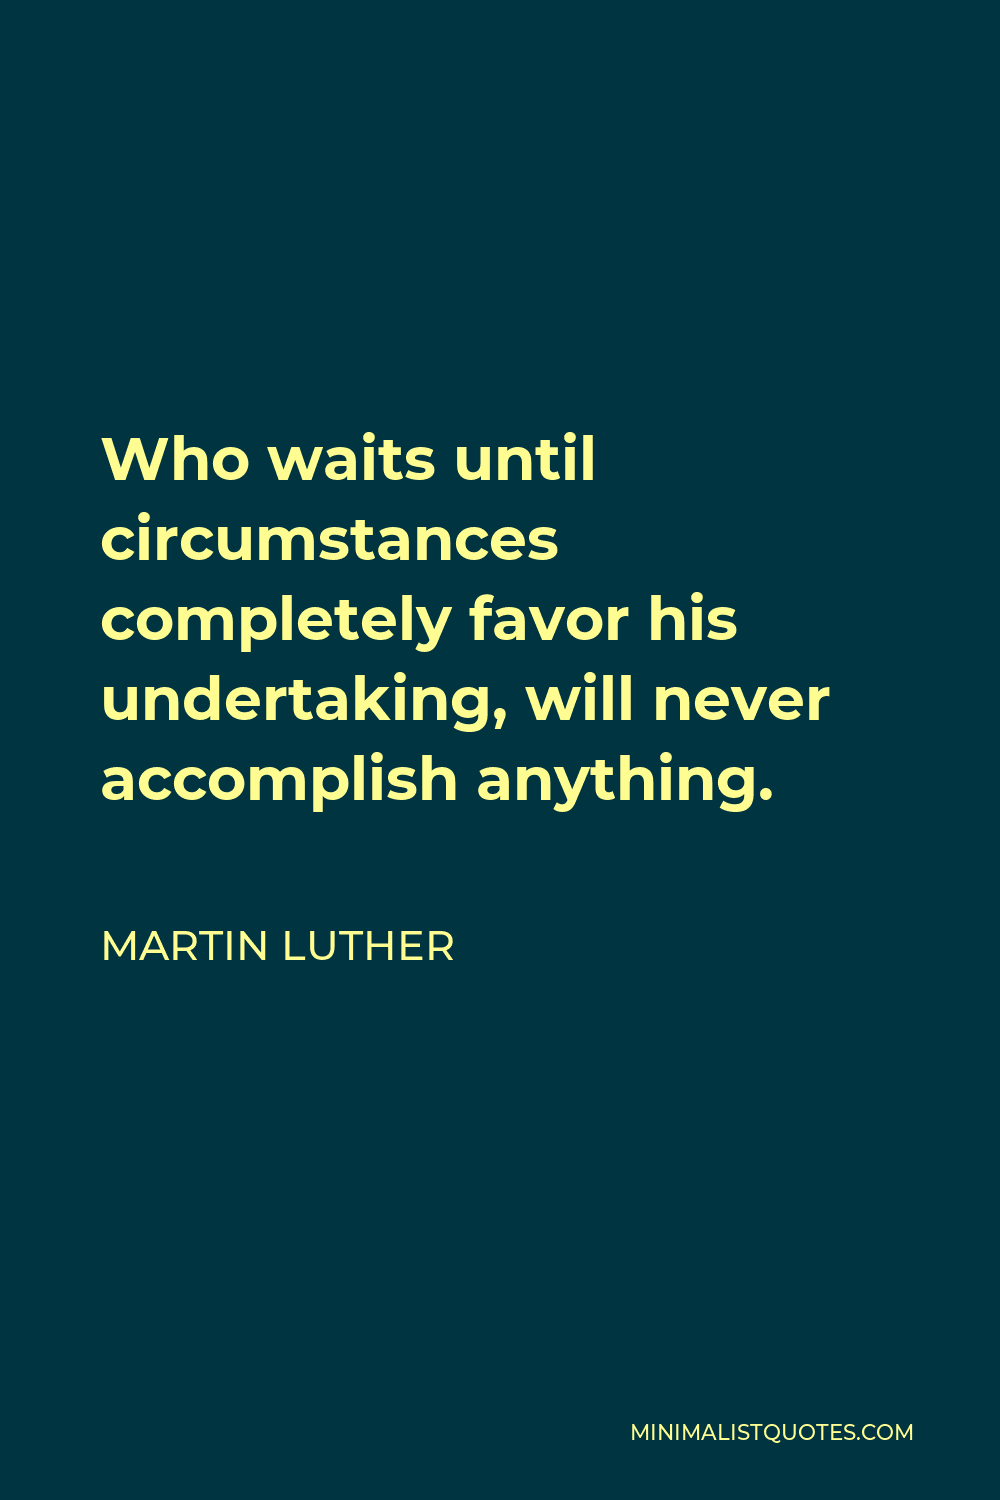 Martin Luther Quote - Who waits until circumstances completely favor his undertaking, will never accomplish anything.